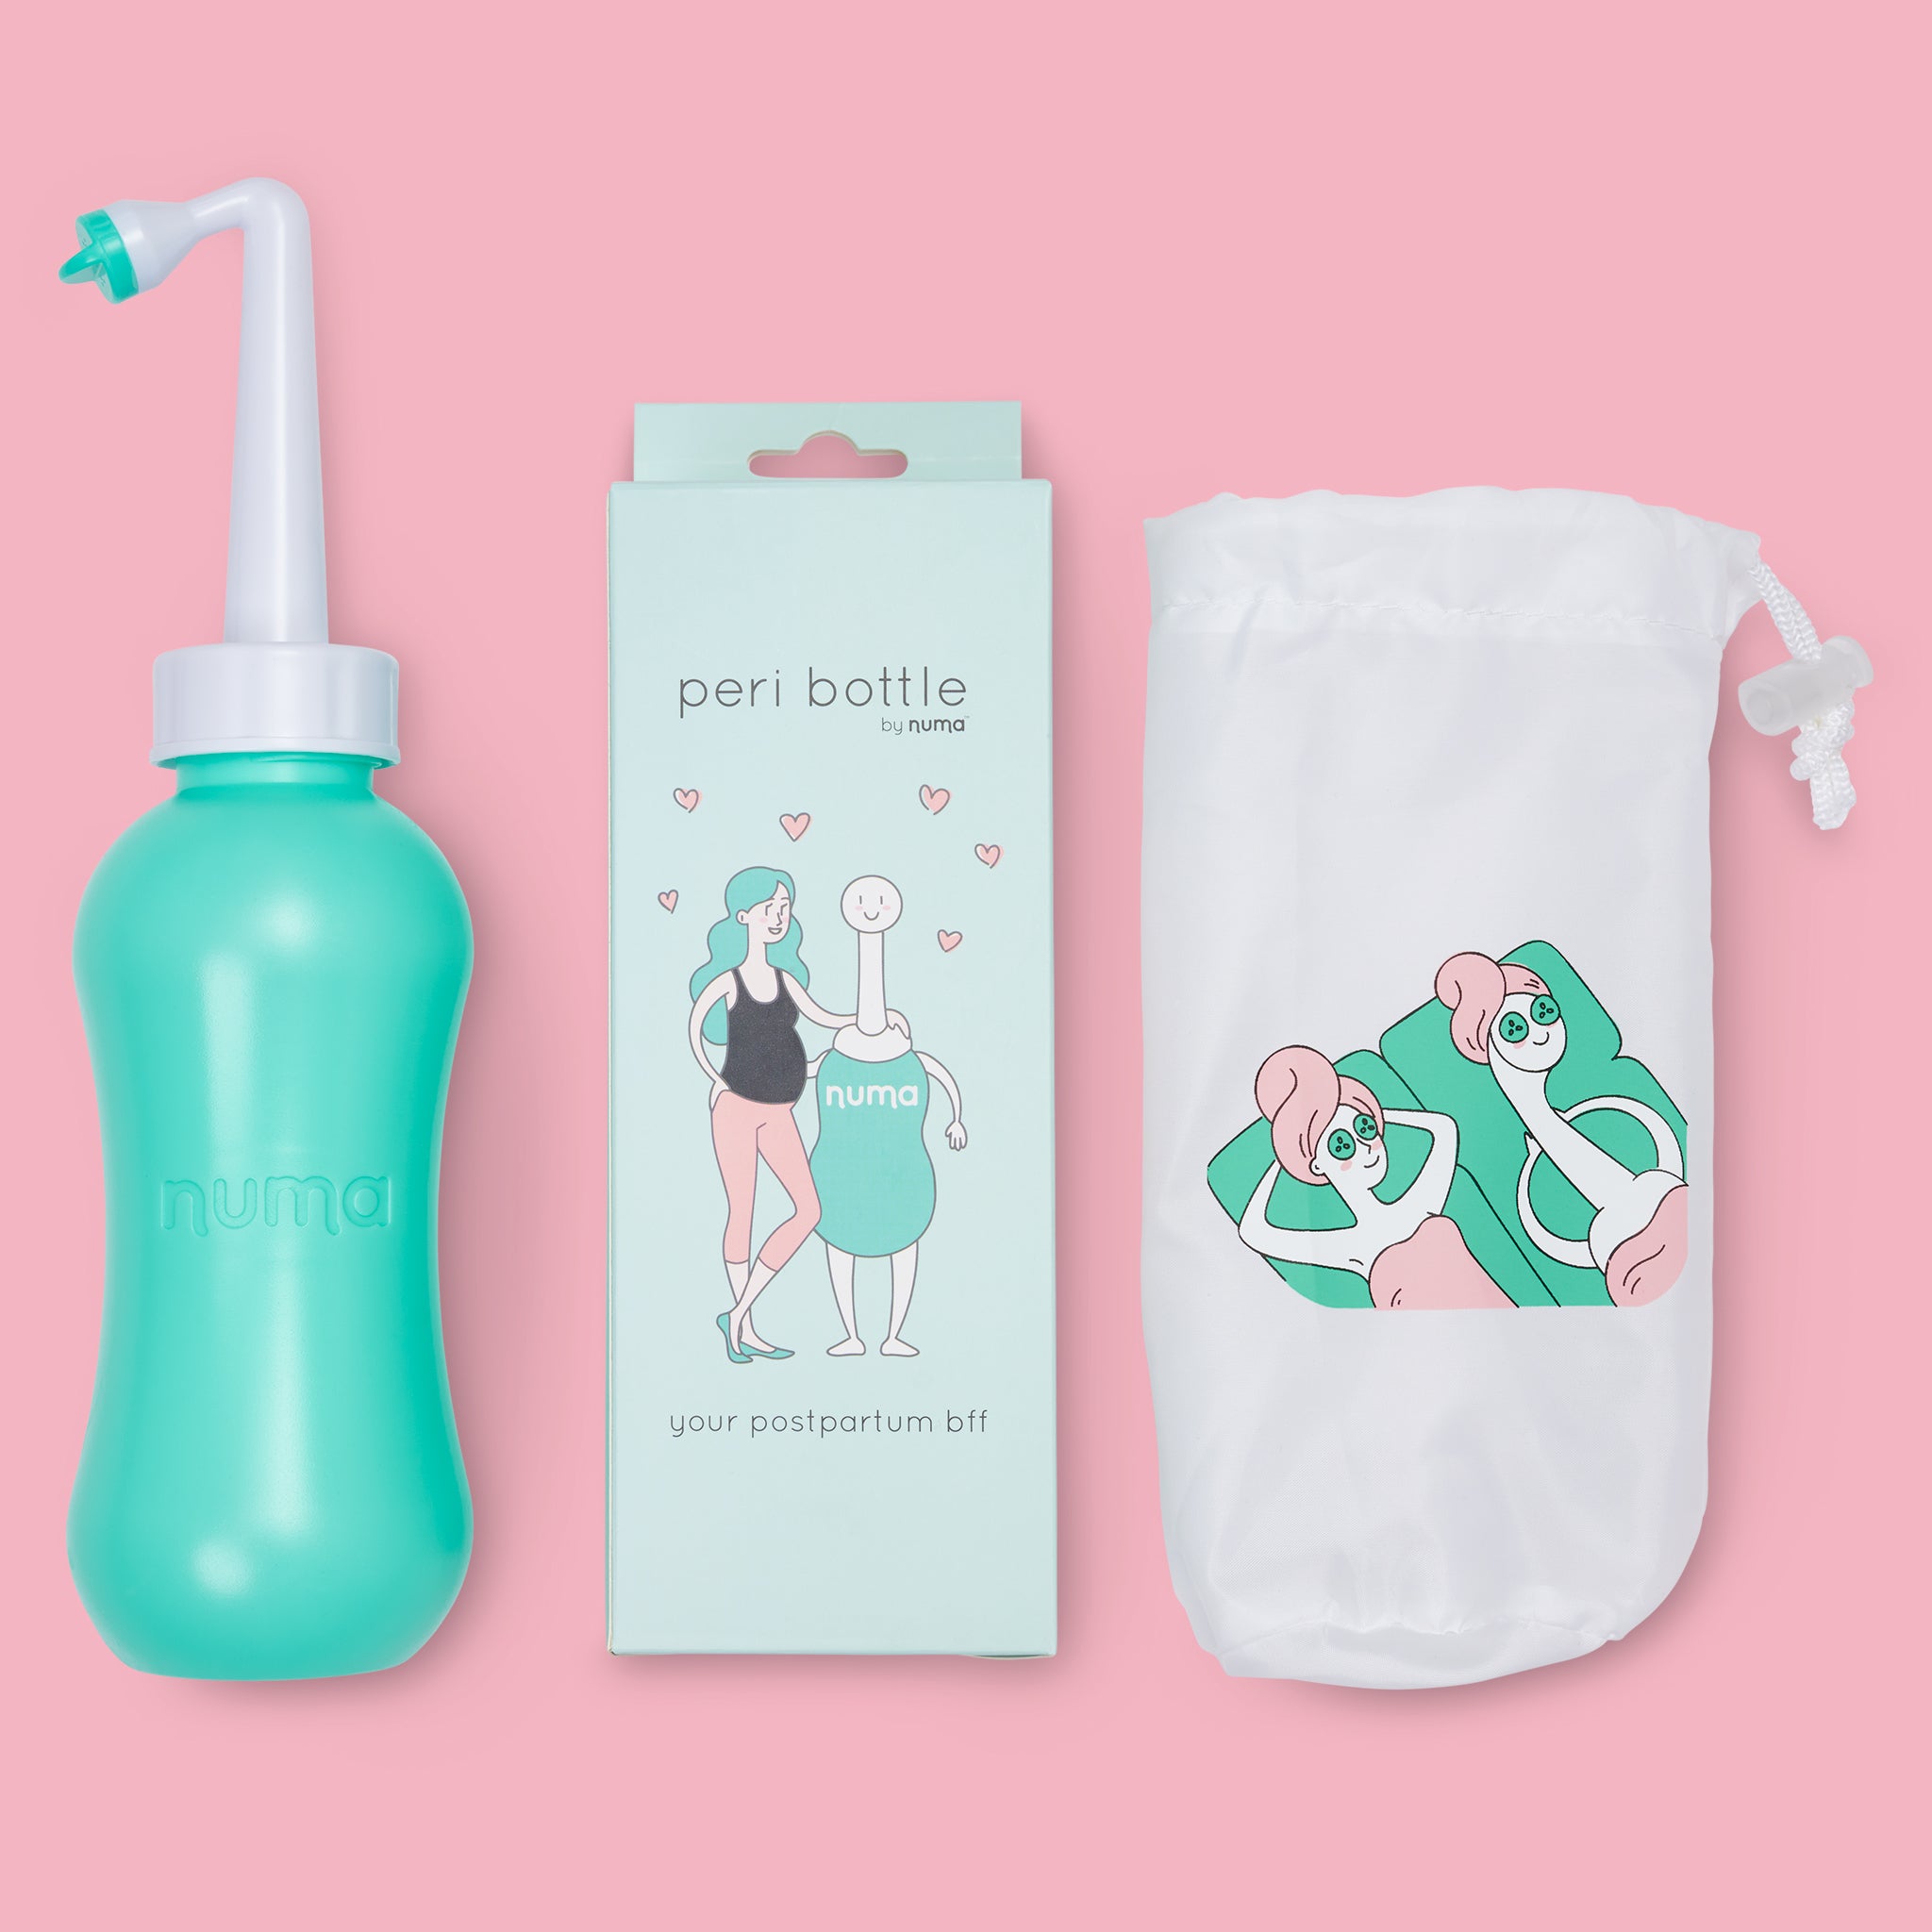 What is a peri bottle and how can it help after giving birth?